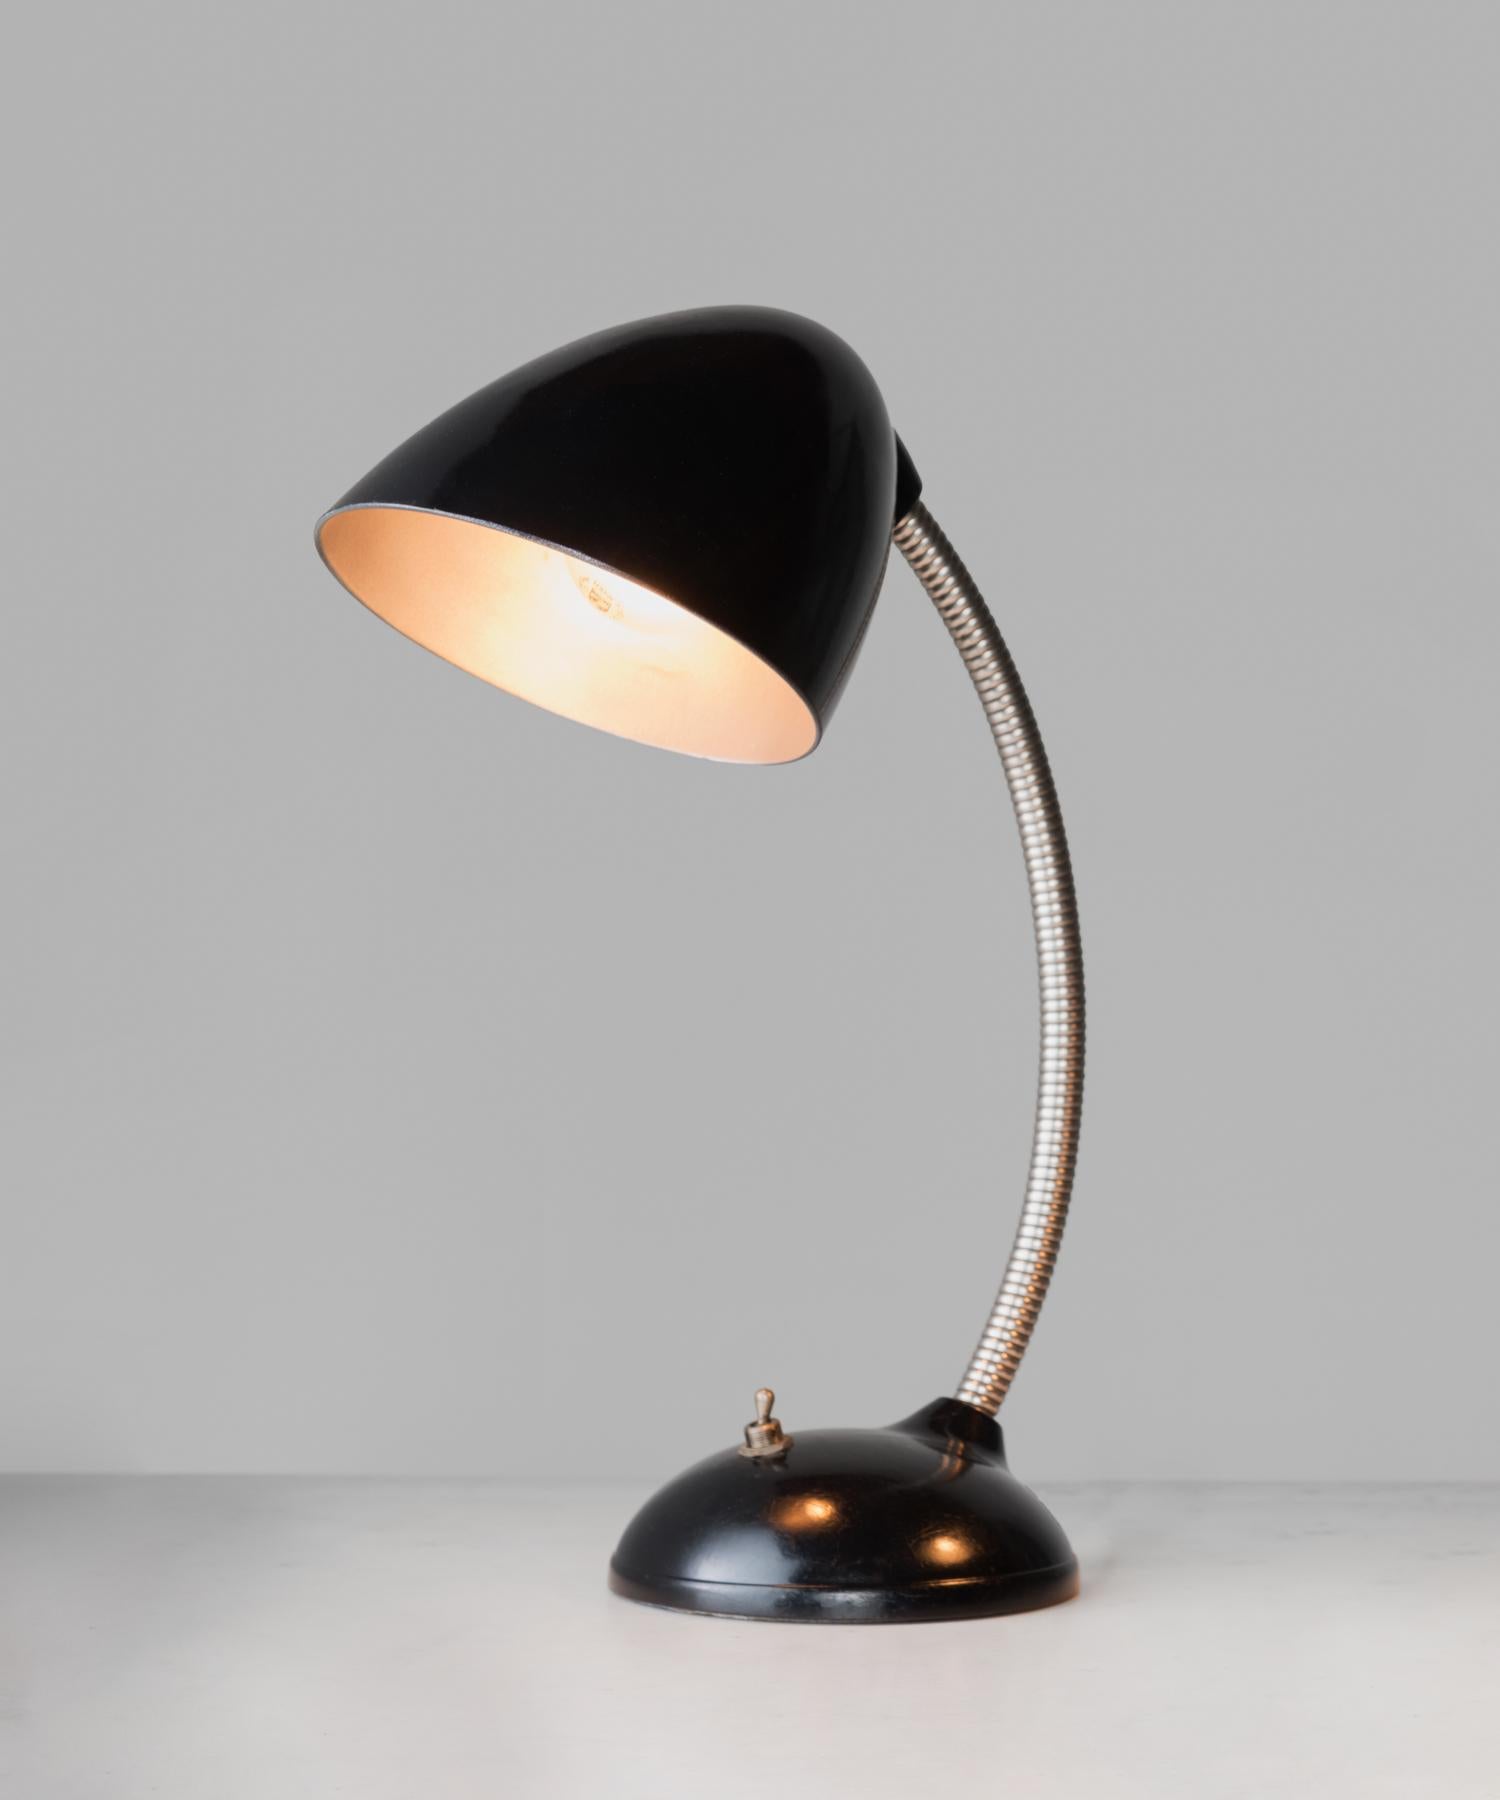 E.K. Cole desk lamp, England, circa 1930

Gooseneck Industrial desk lamp designed by Eric Kirkman Cole, with bakelite shade and base. typ 11.105 model.